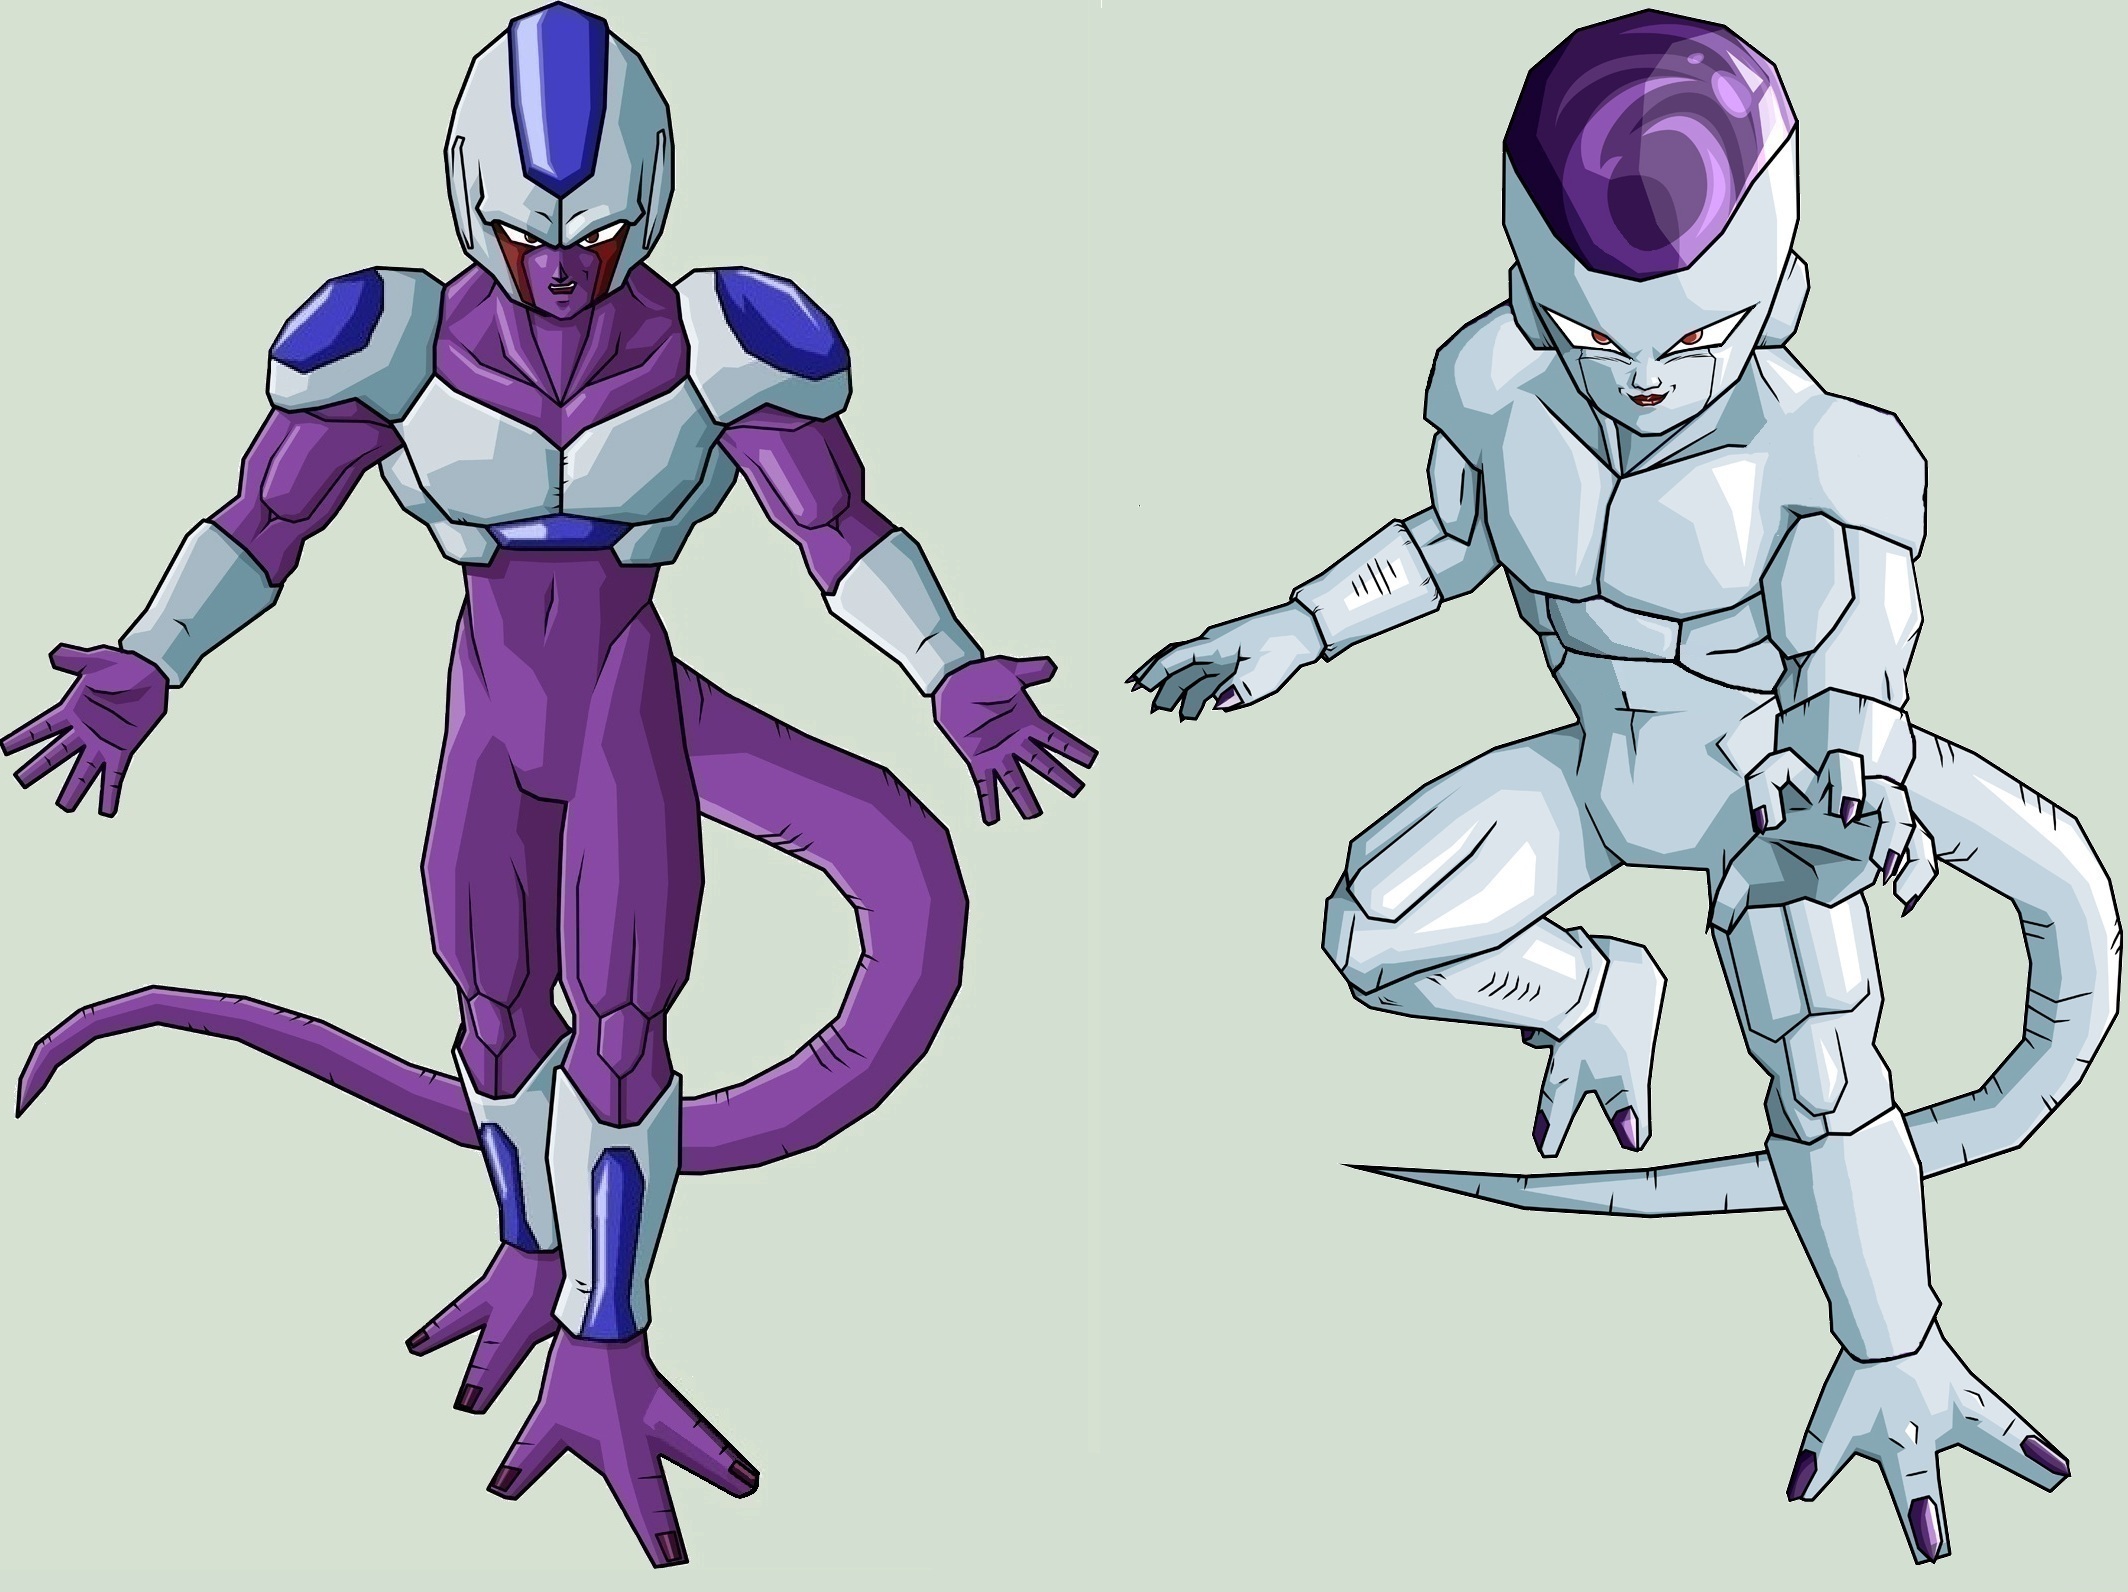 Once in hell, frieza broke out of jail and hid in yenma forest. 